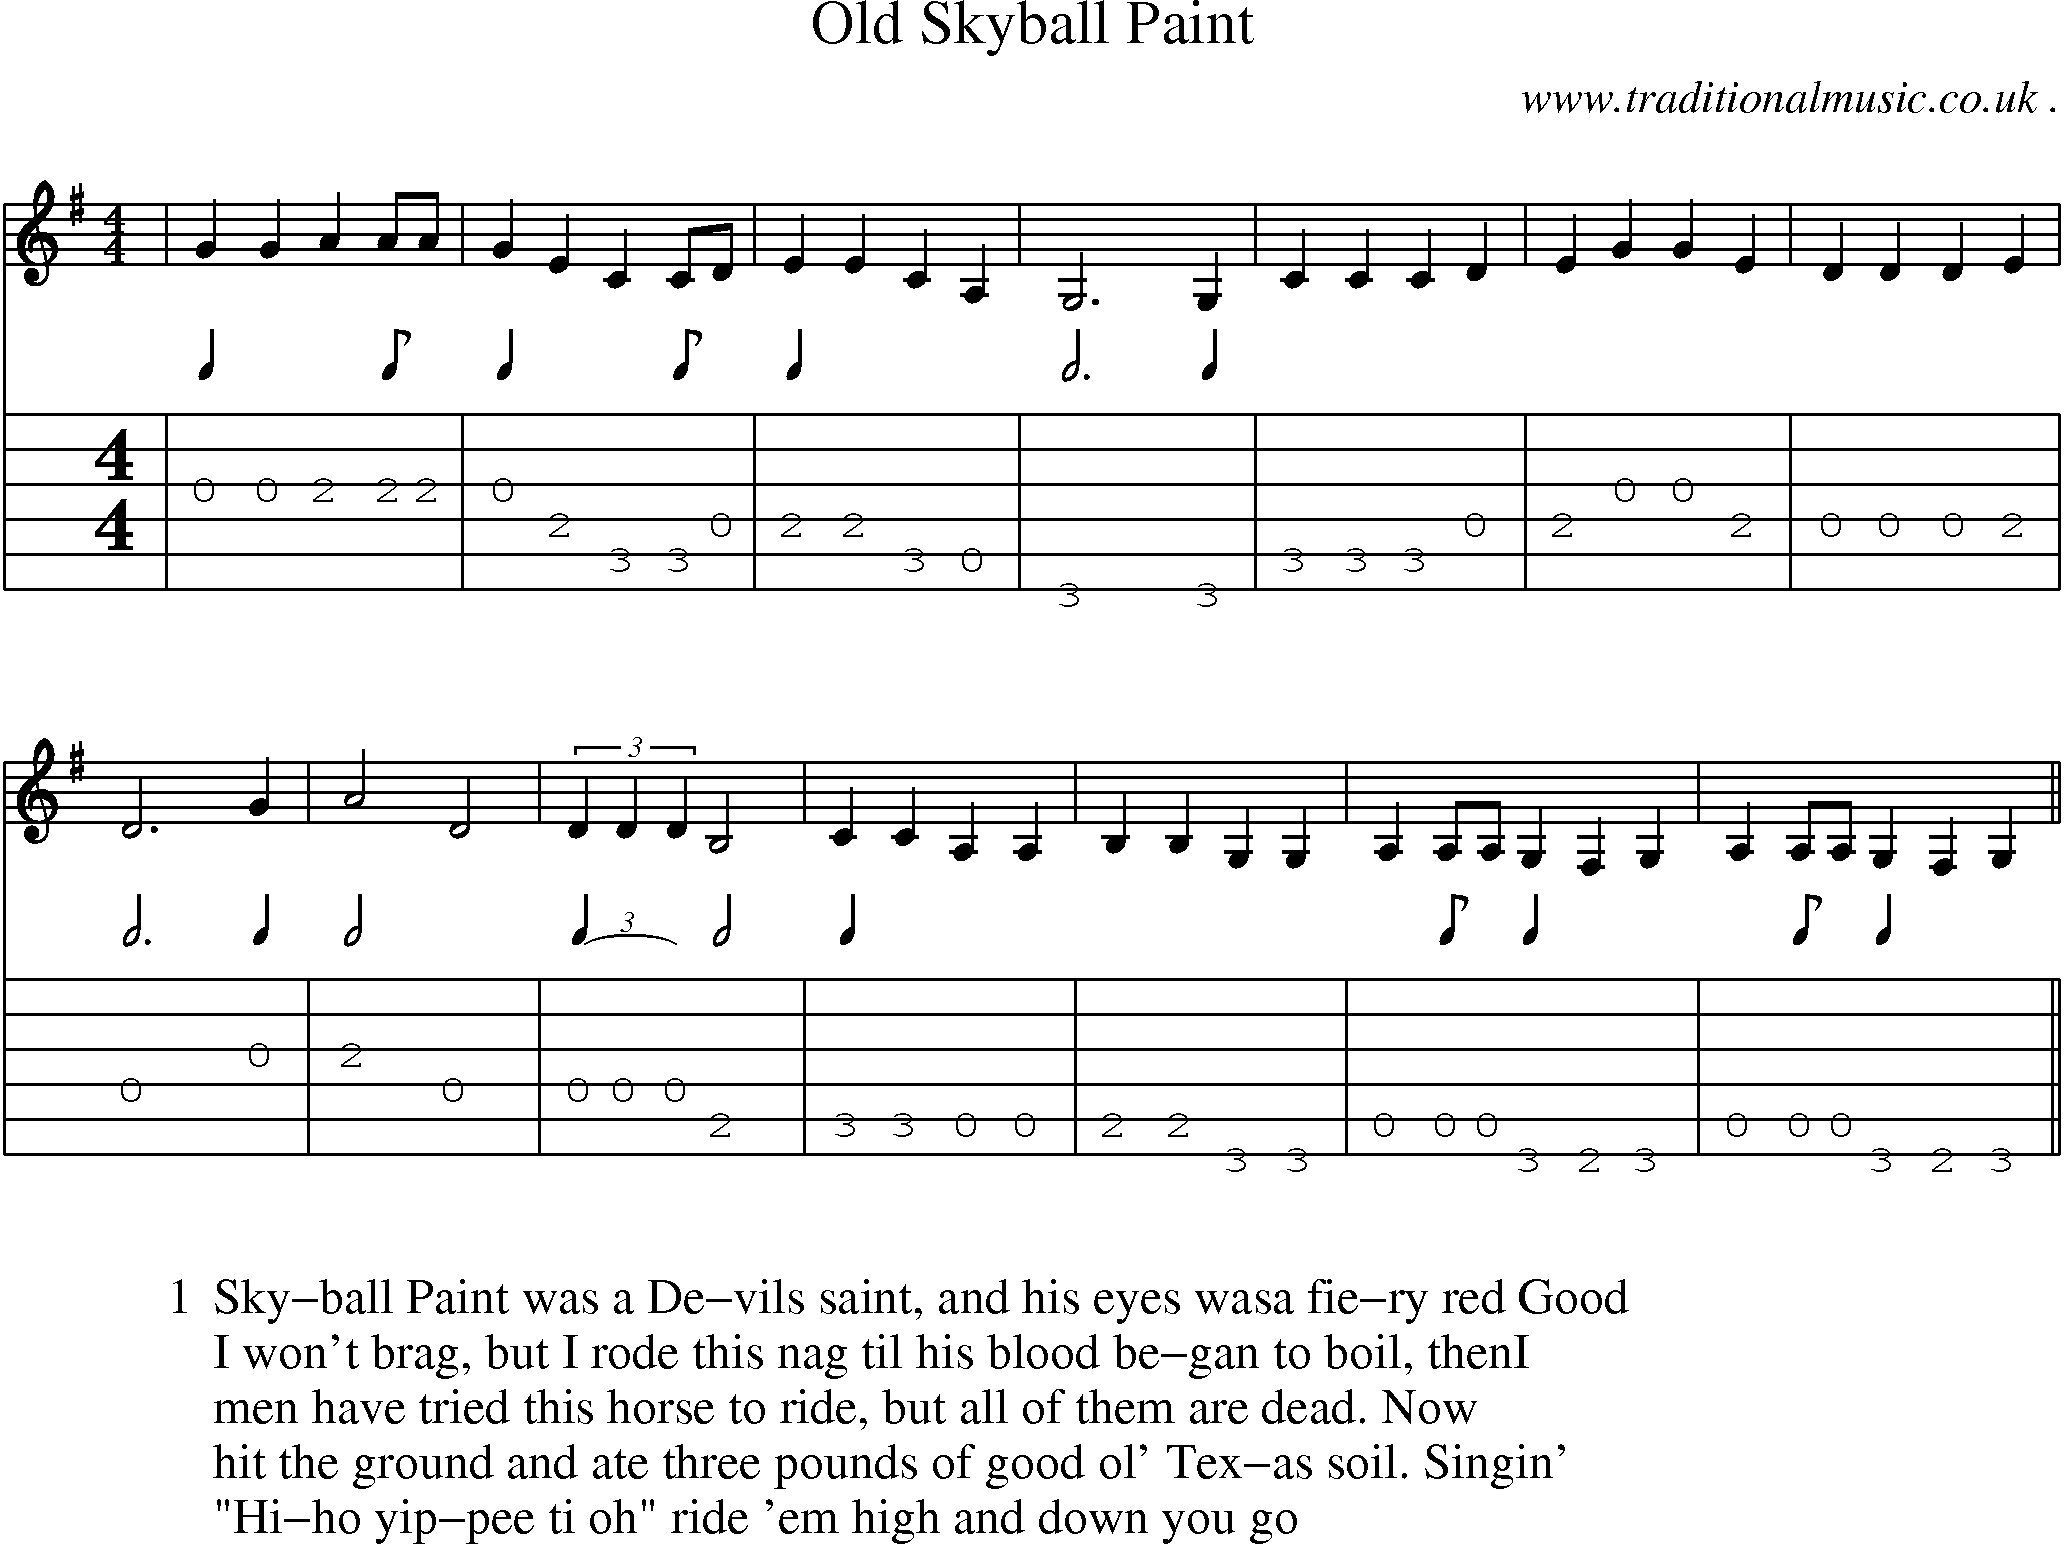 Music Score and Guitar Tabs for Old Skyball Paint